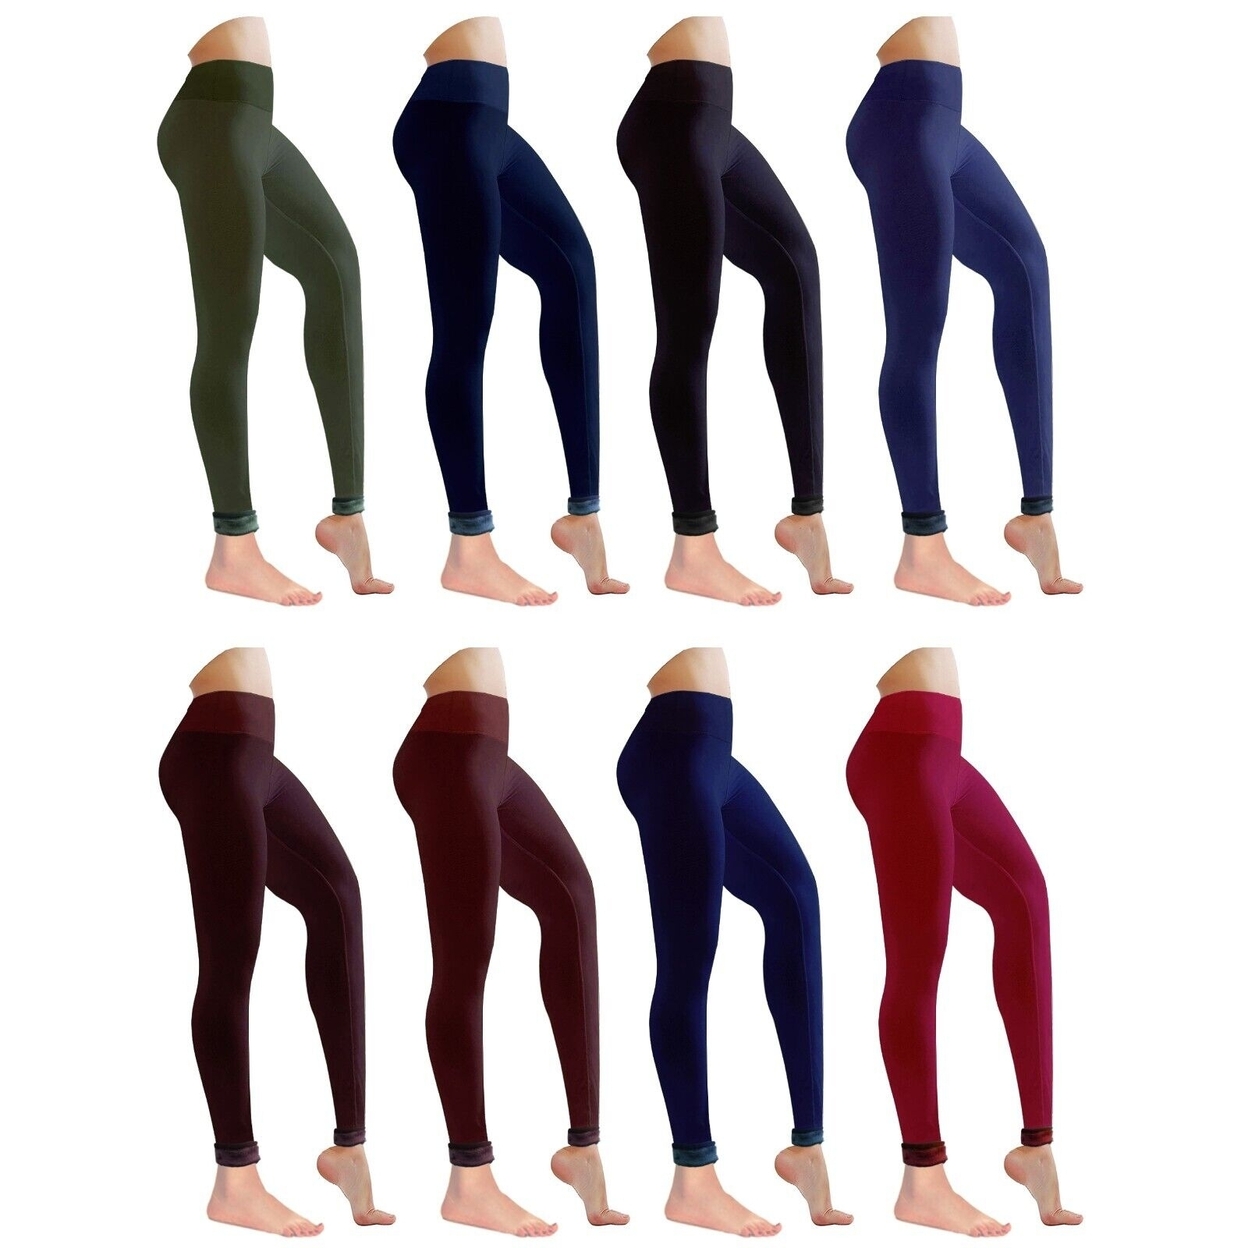 4-Pack: Women's Winter Warm Ultra Soft Cozy Fur Lined Leggings - Assorted, Small